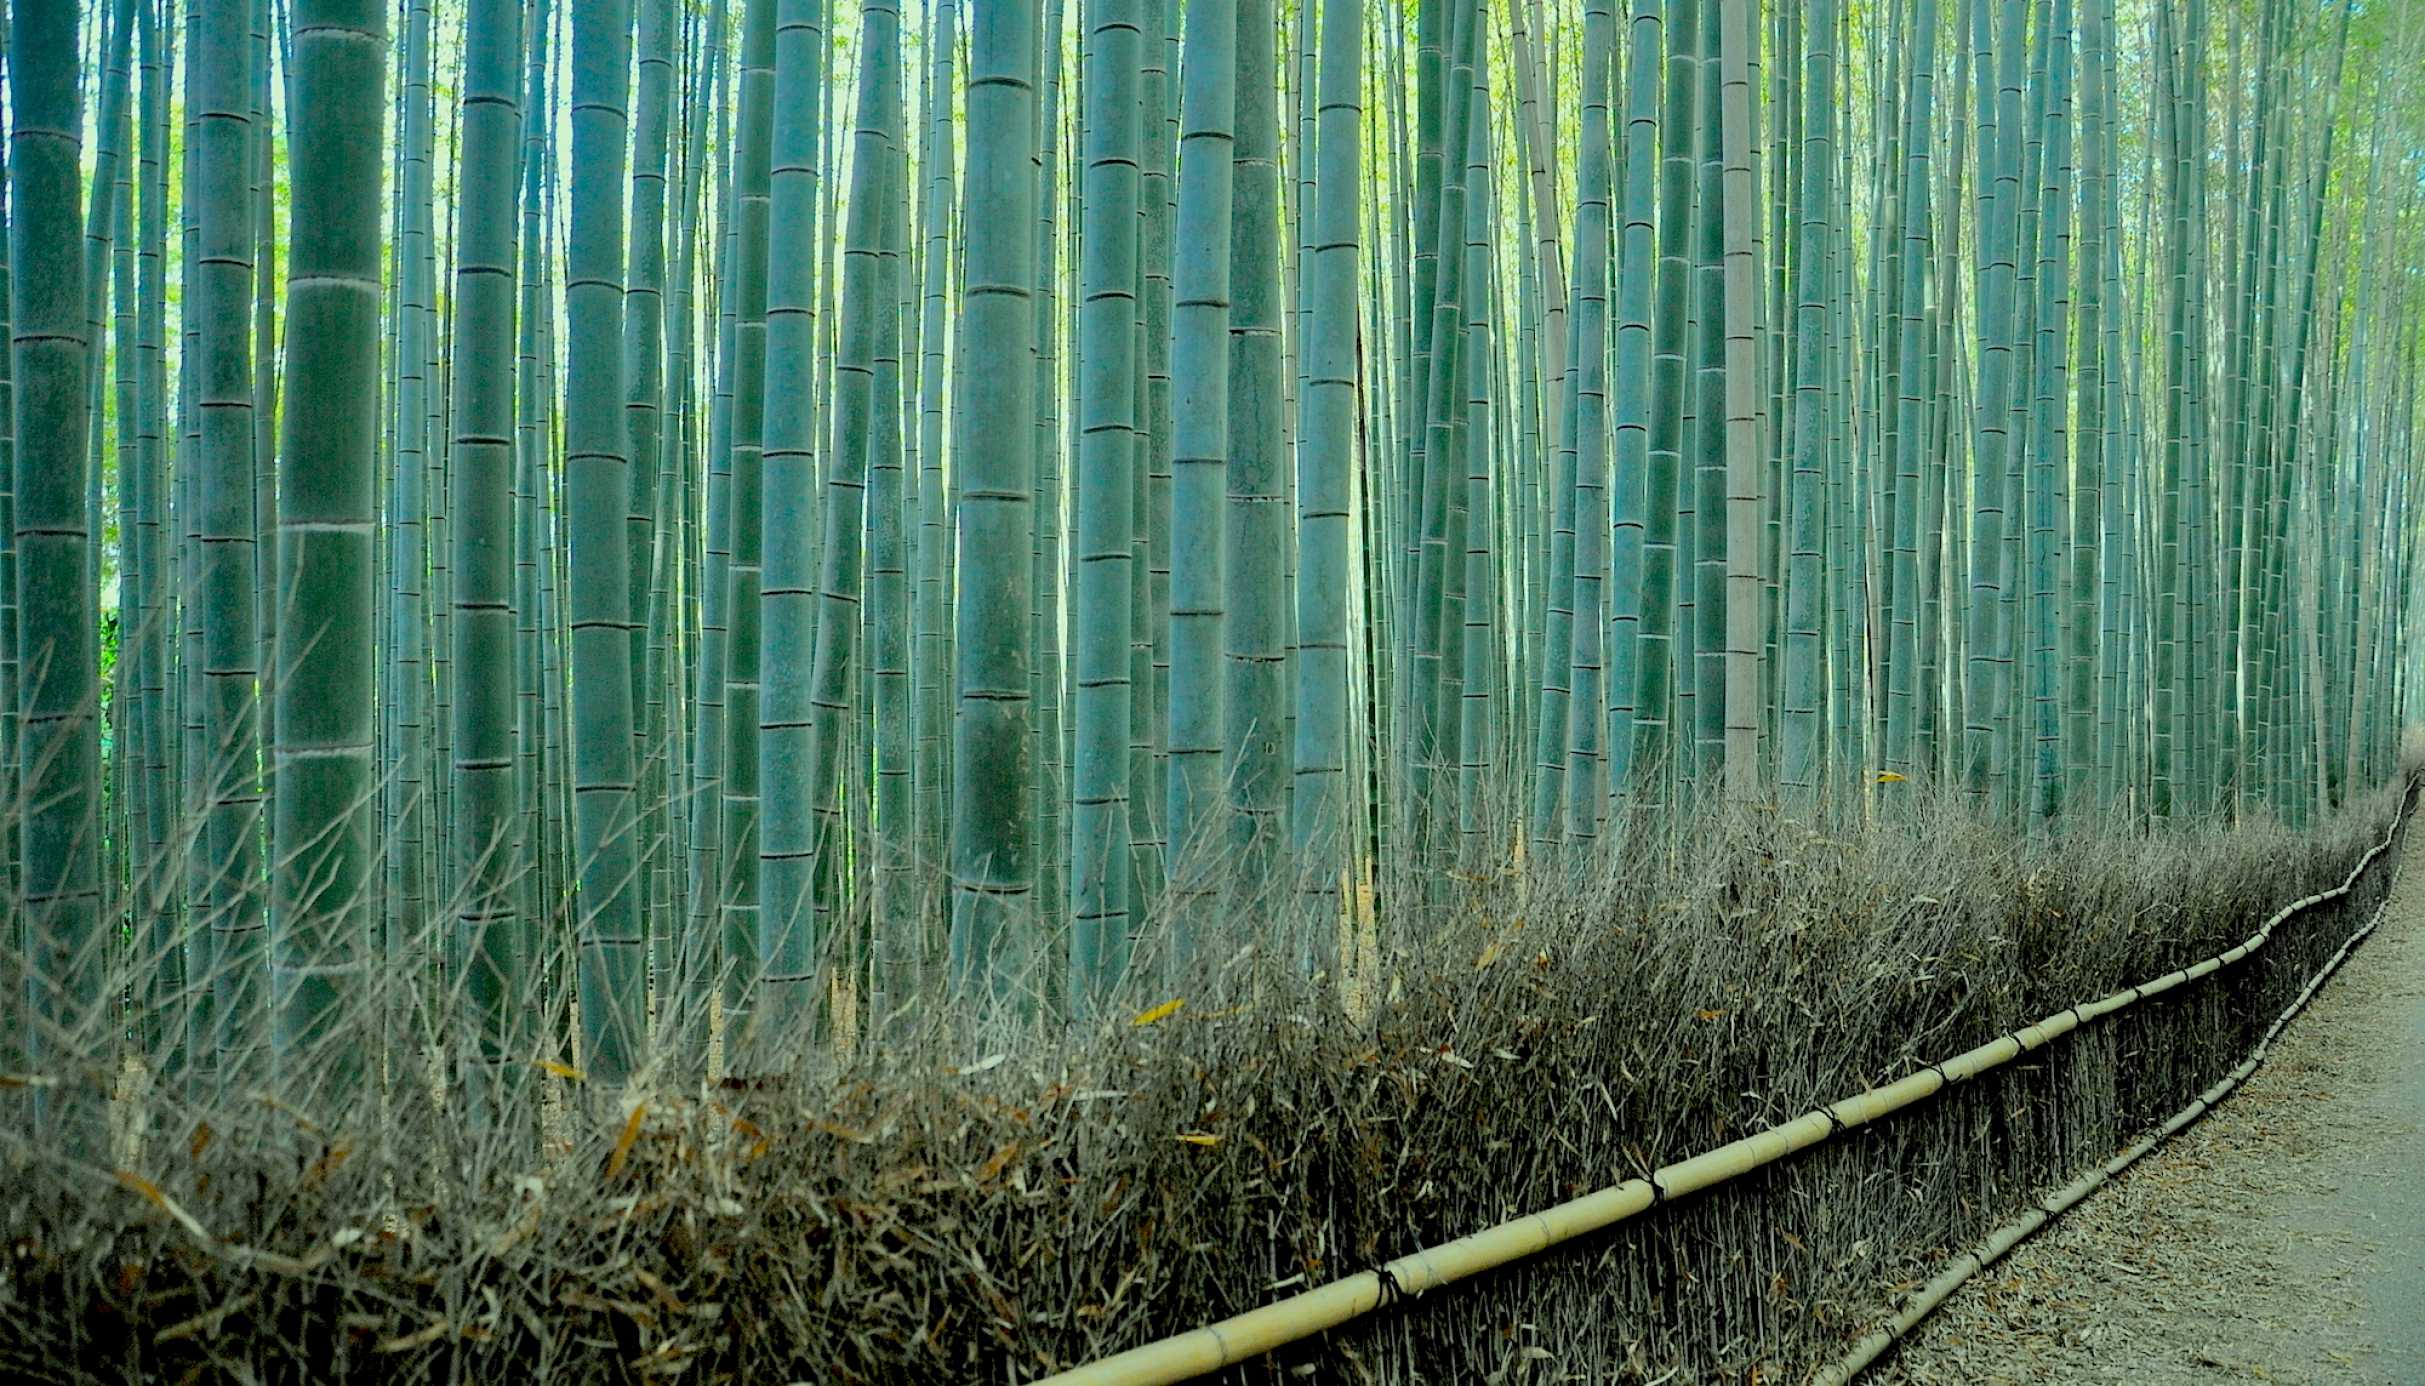 sagano bamboo forest in kyoto one of world's prettiest groves cnn